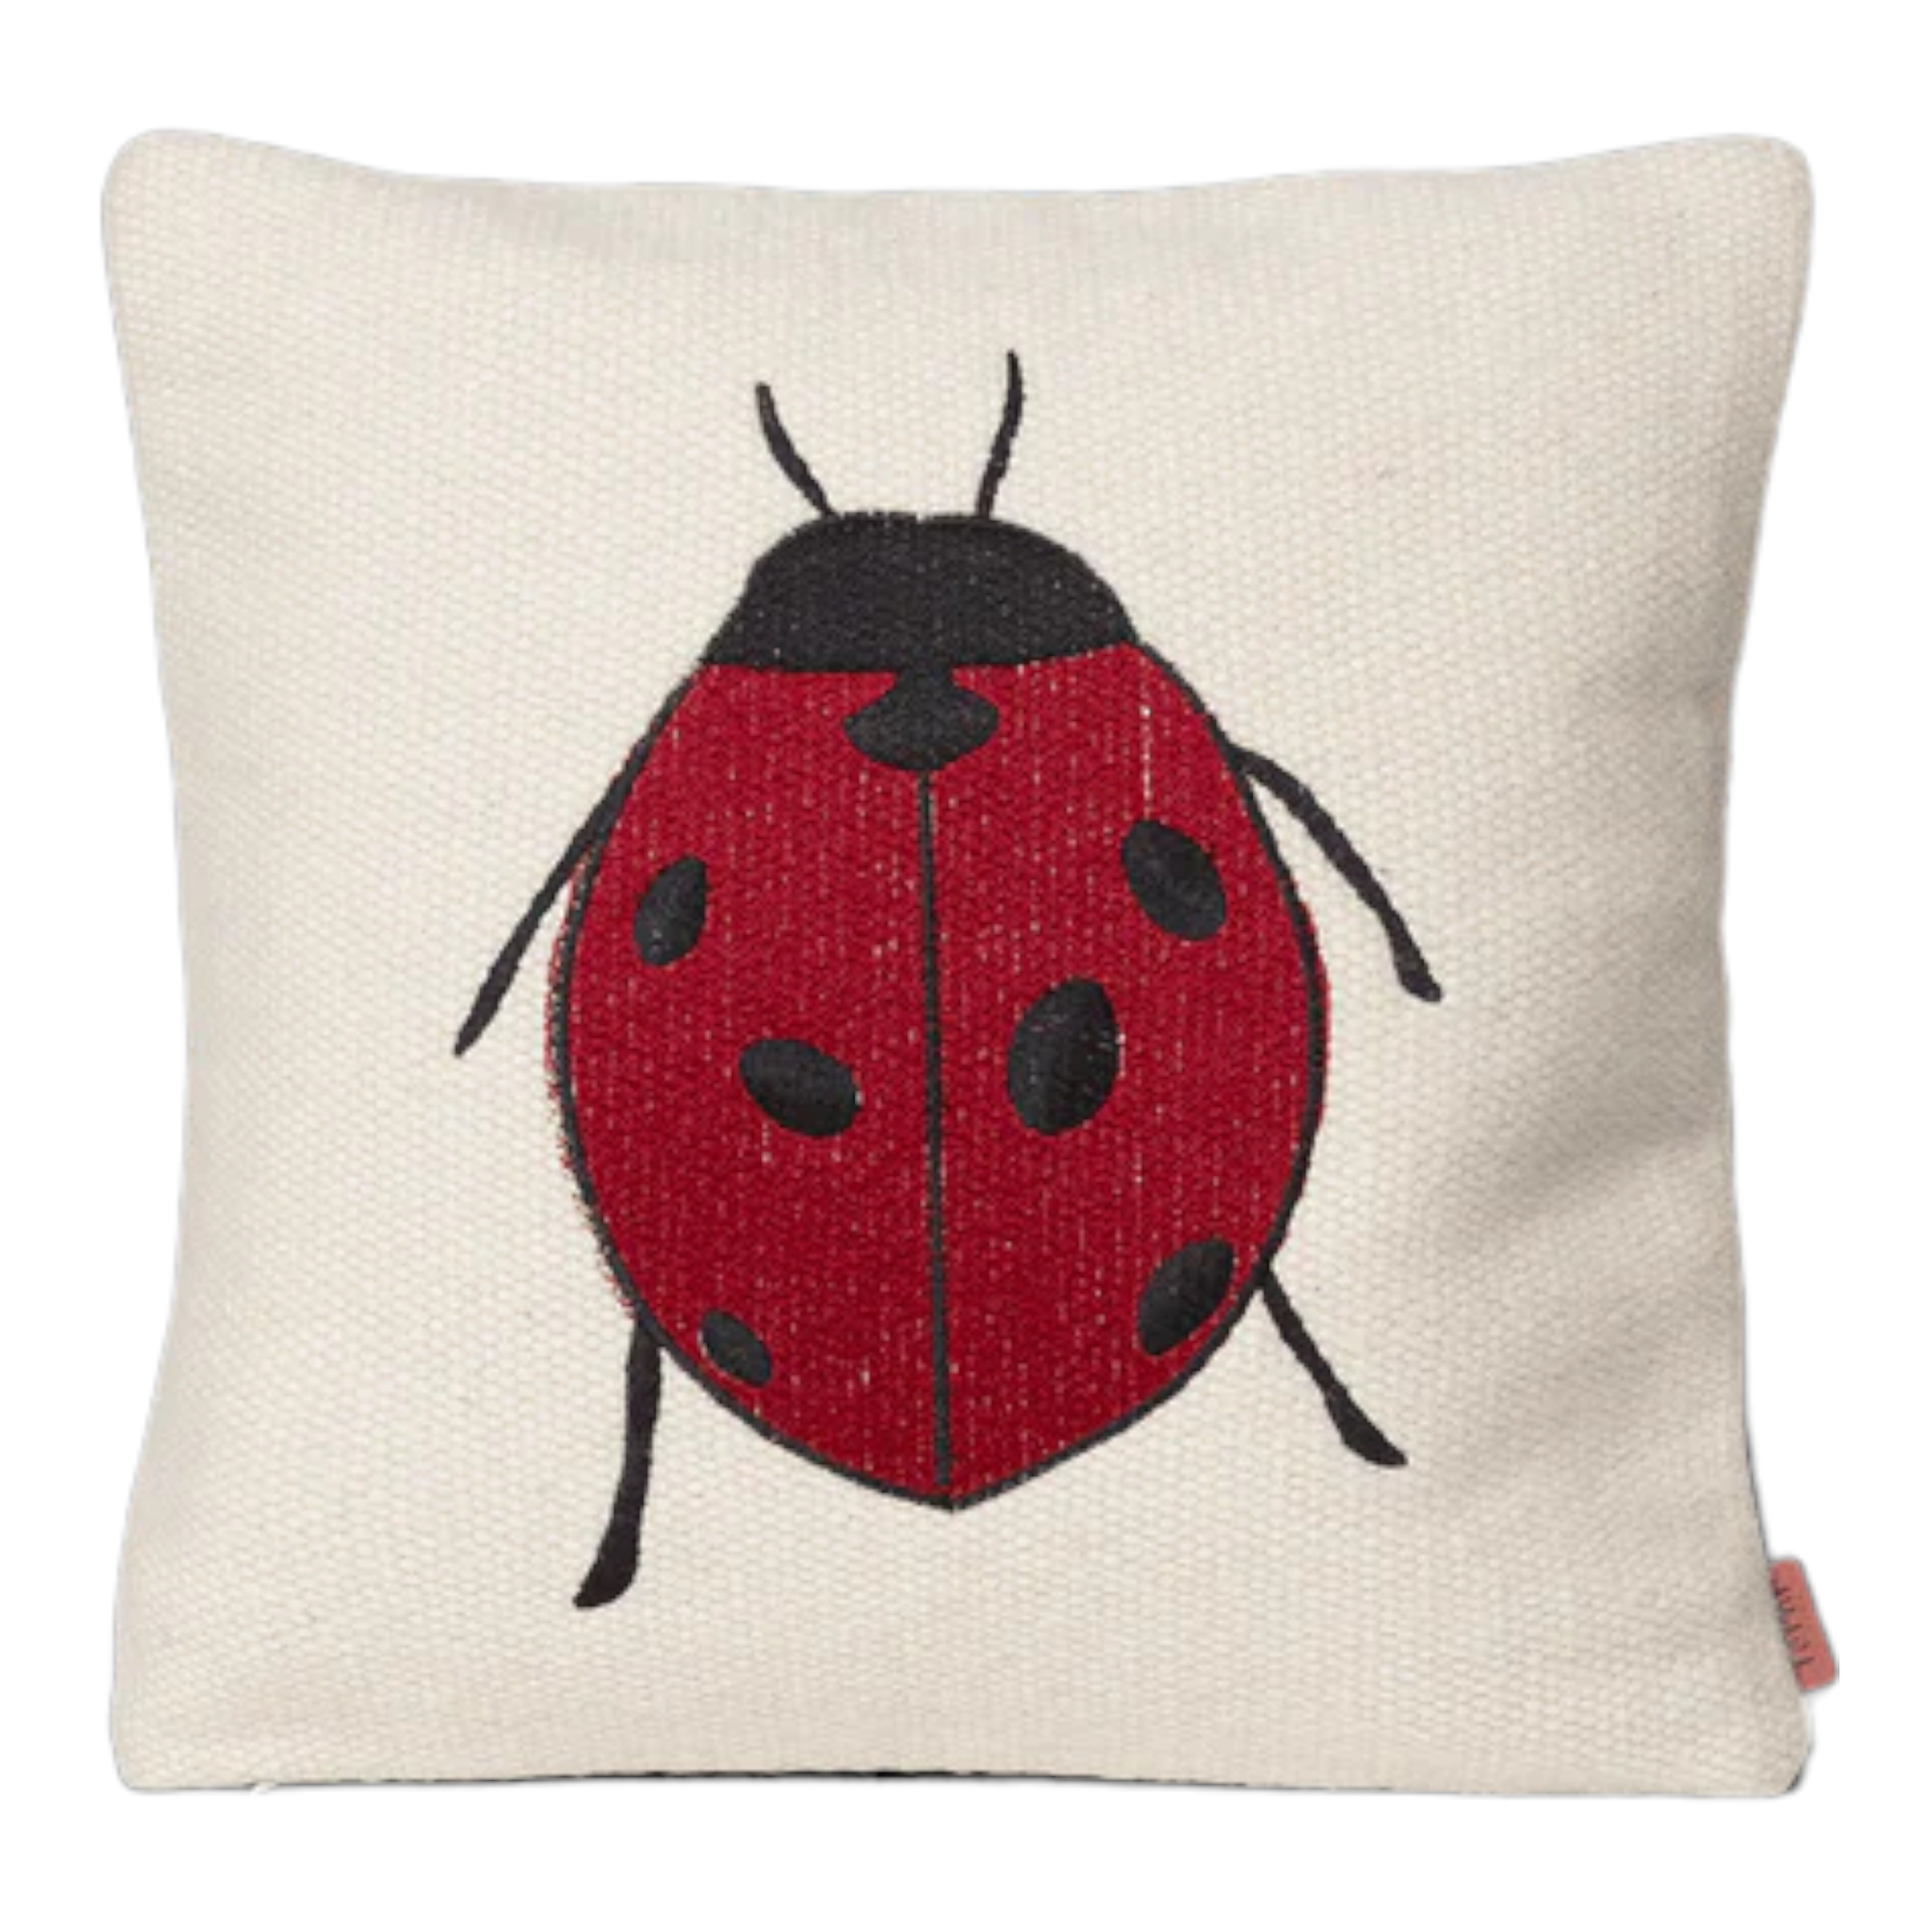 FOREST EMBROIDERED CUSHION LADYBIRD Club Palma 